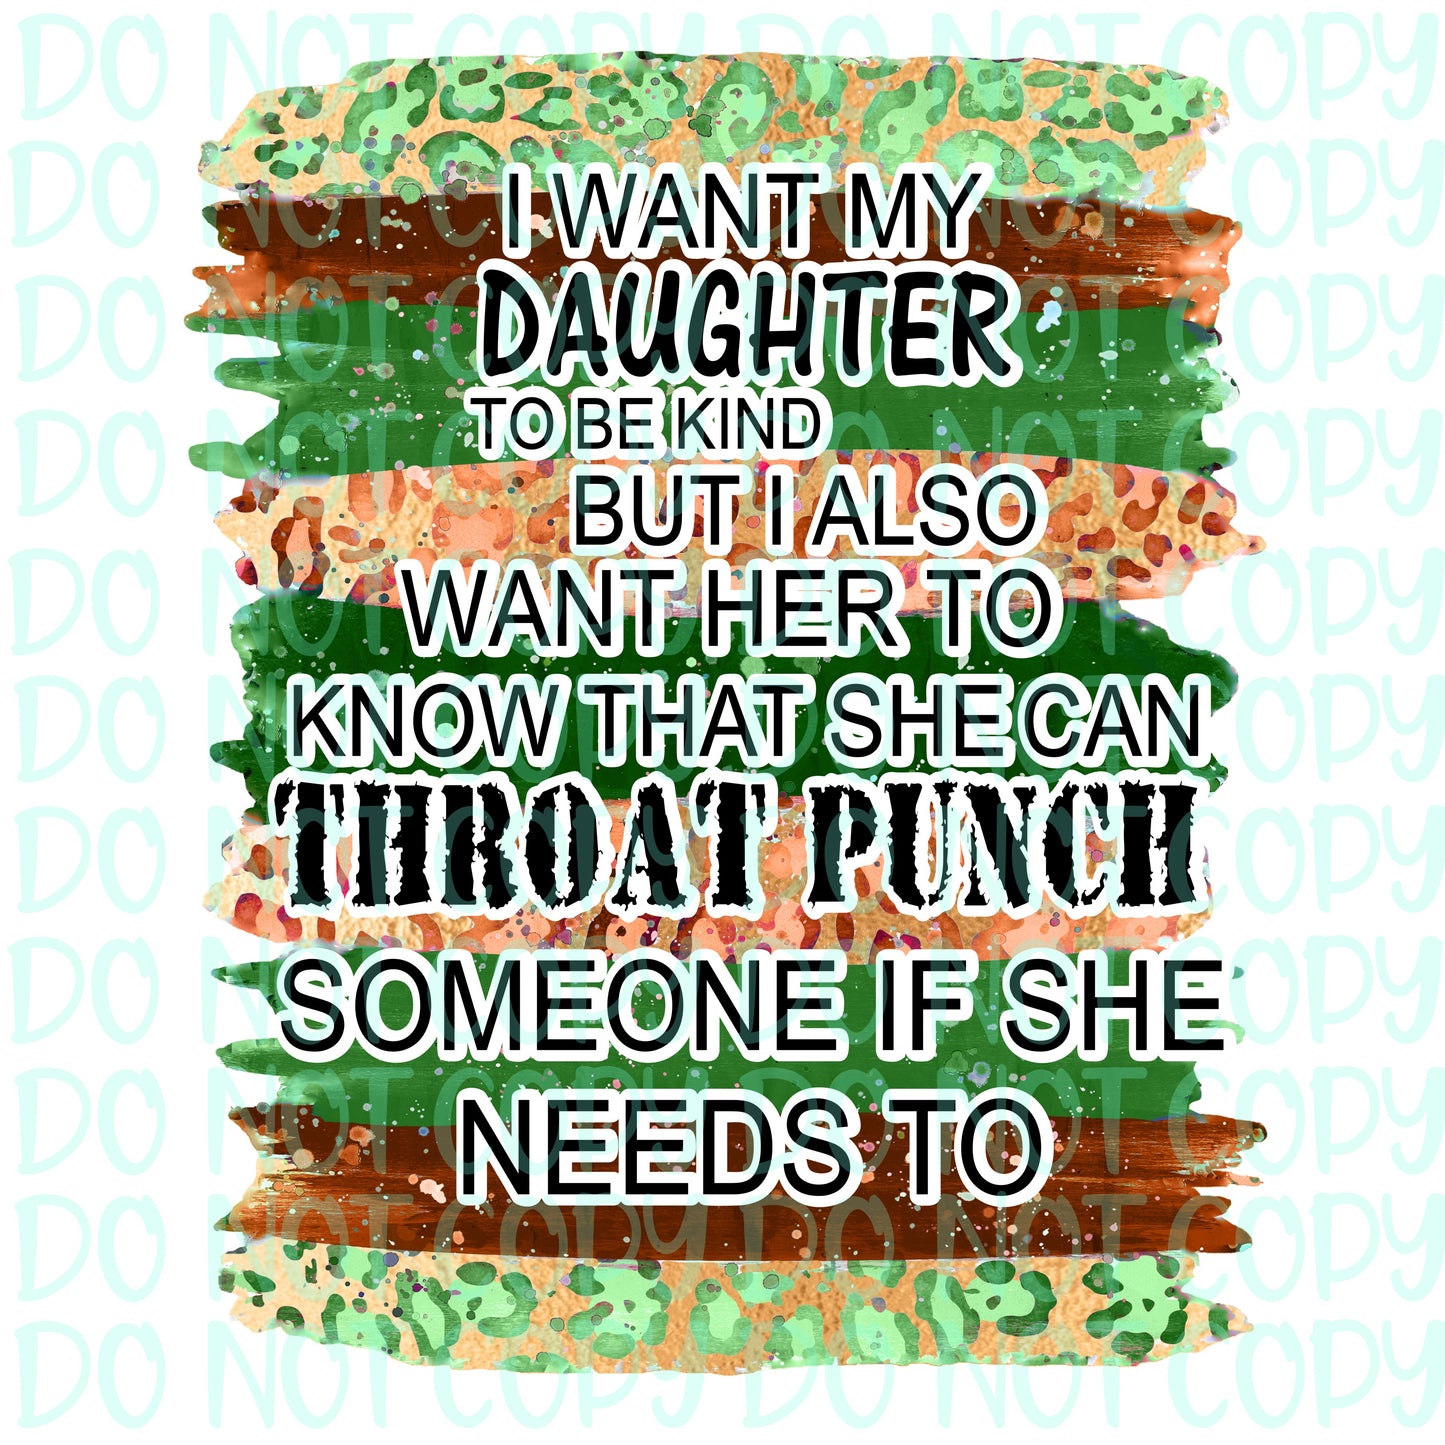 I want a kind daughter